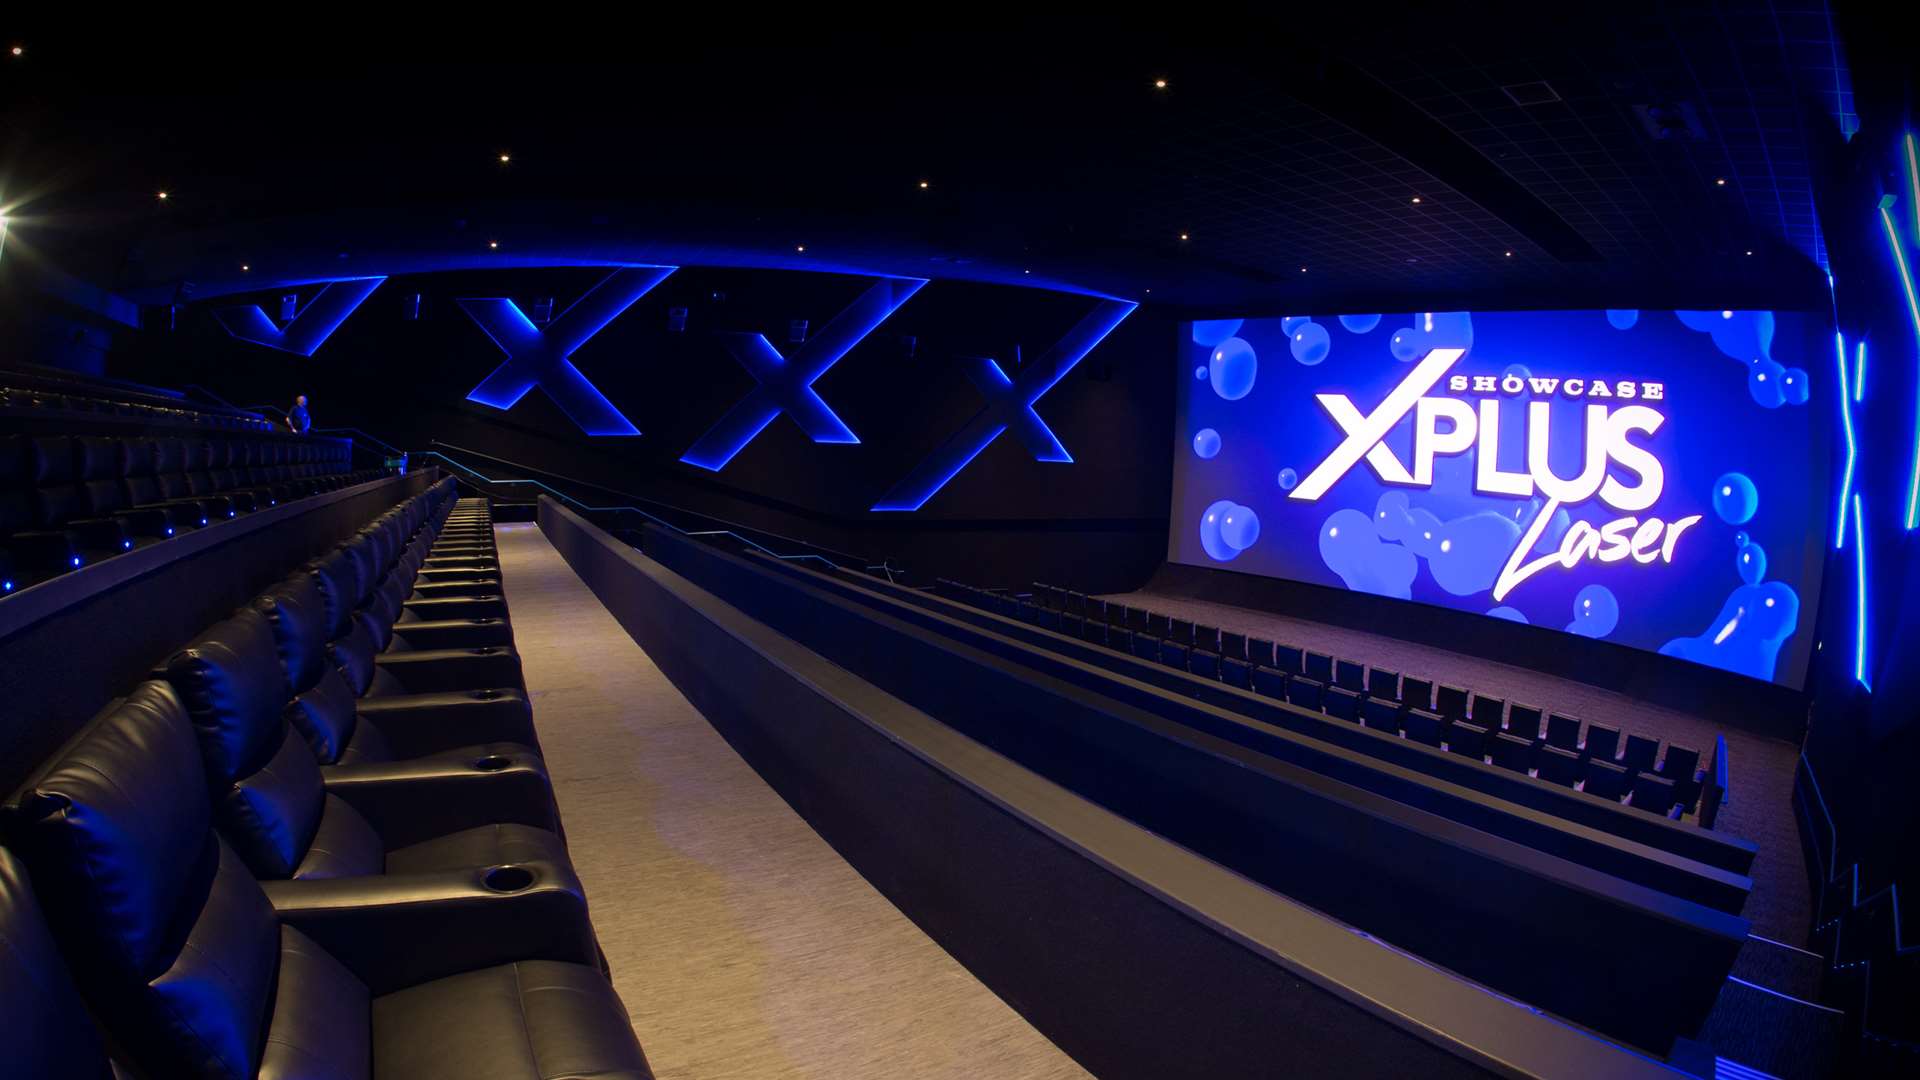 Showcase Cinema de Lux Bluewater has announced the opening of four state of the art screens.